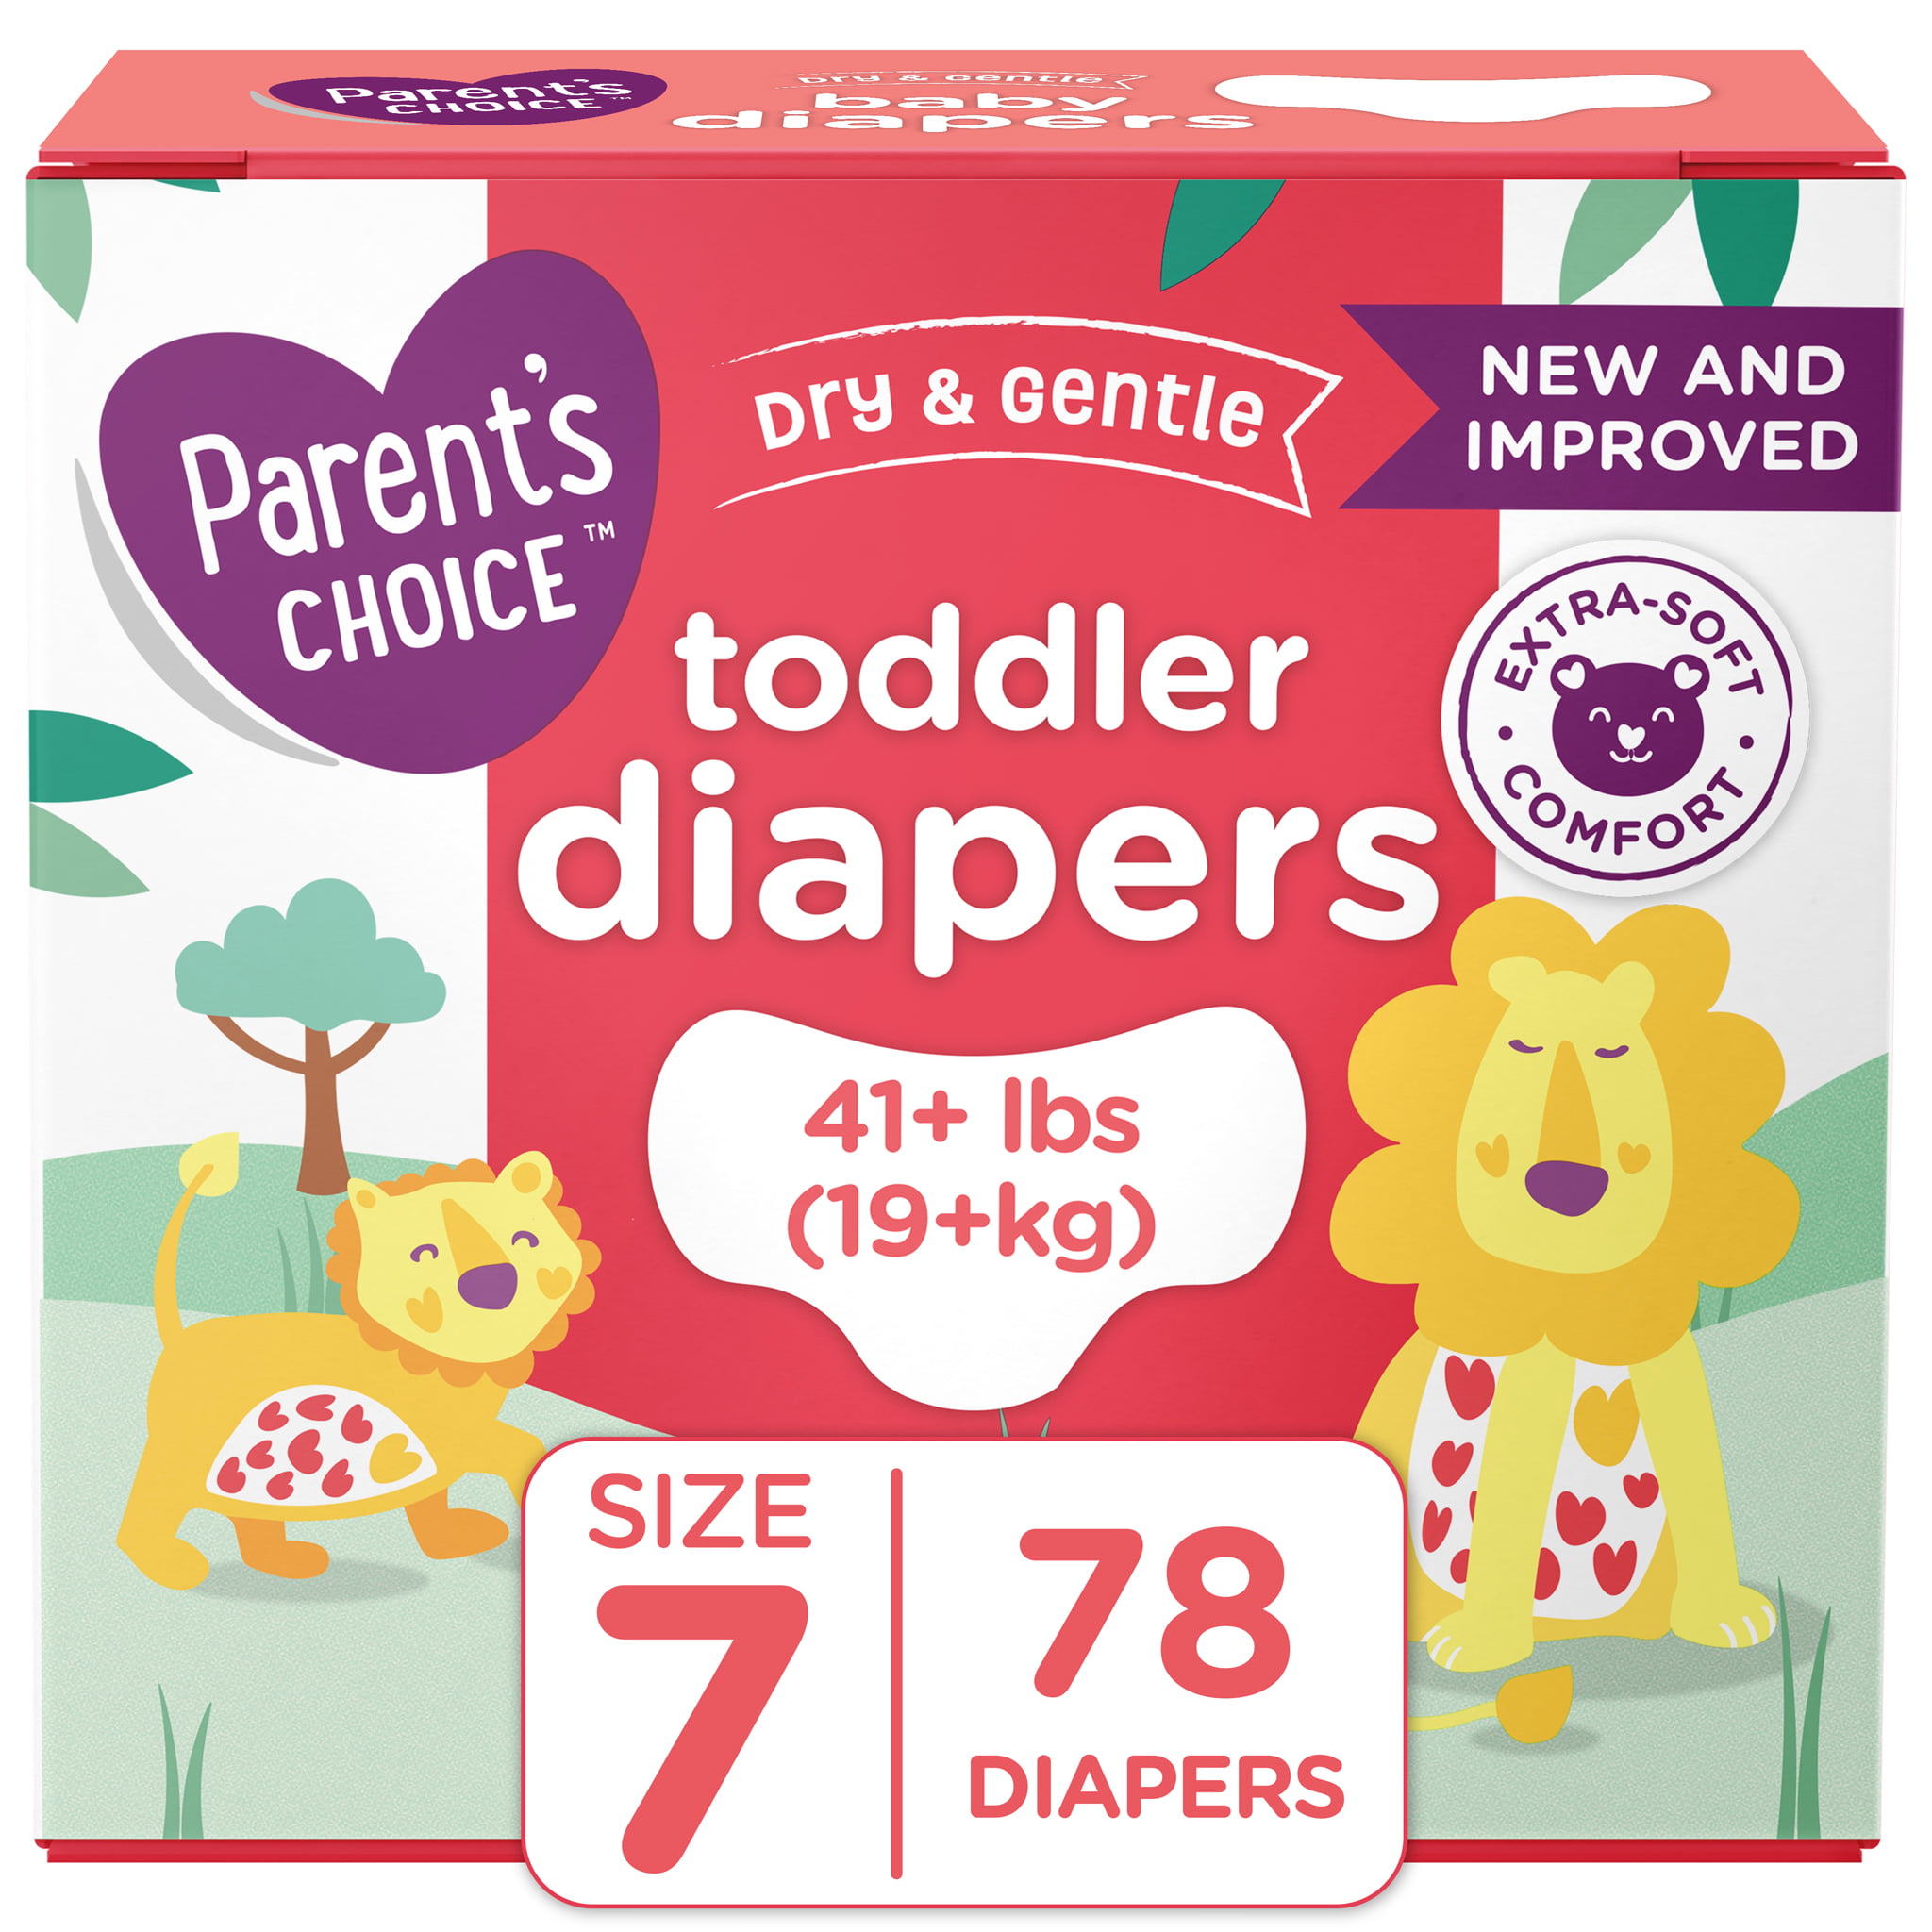 Parent's Choice Dry and Gentle Toddler Diapers, Size 7, 78 Count